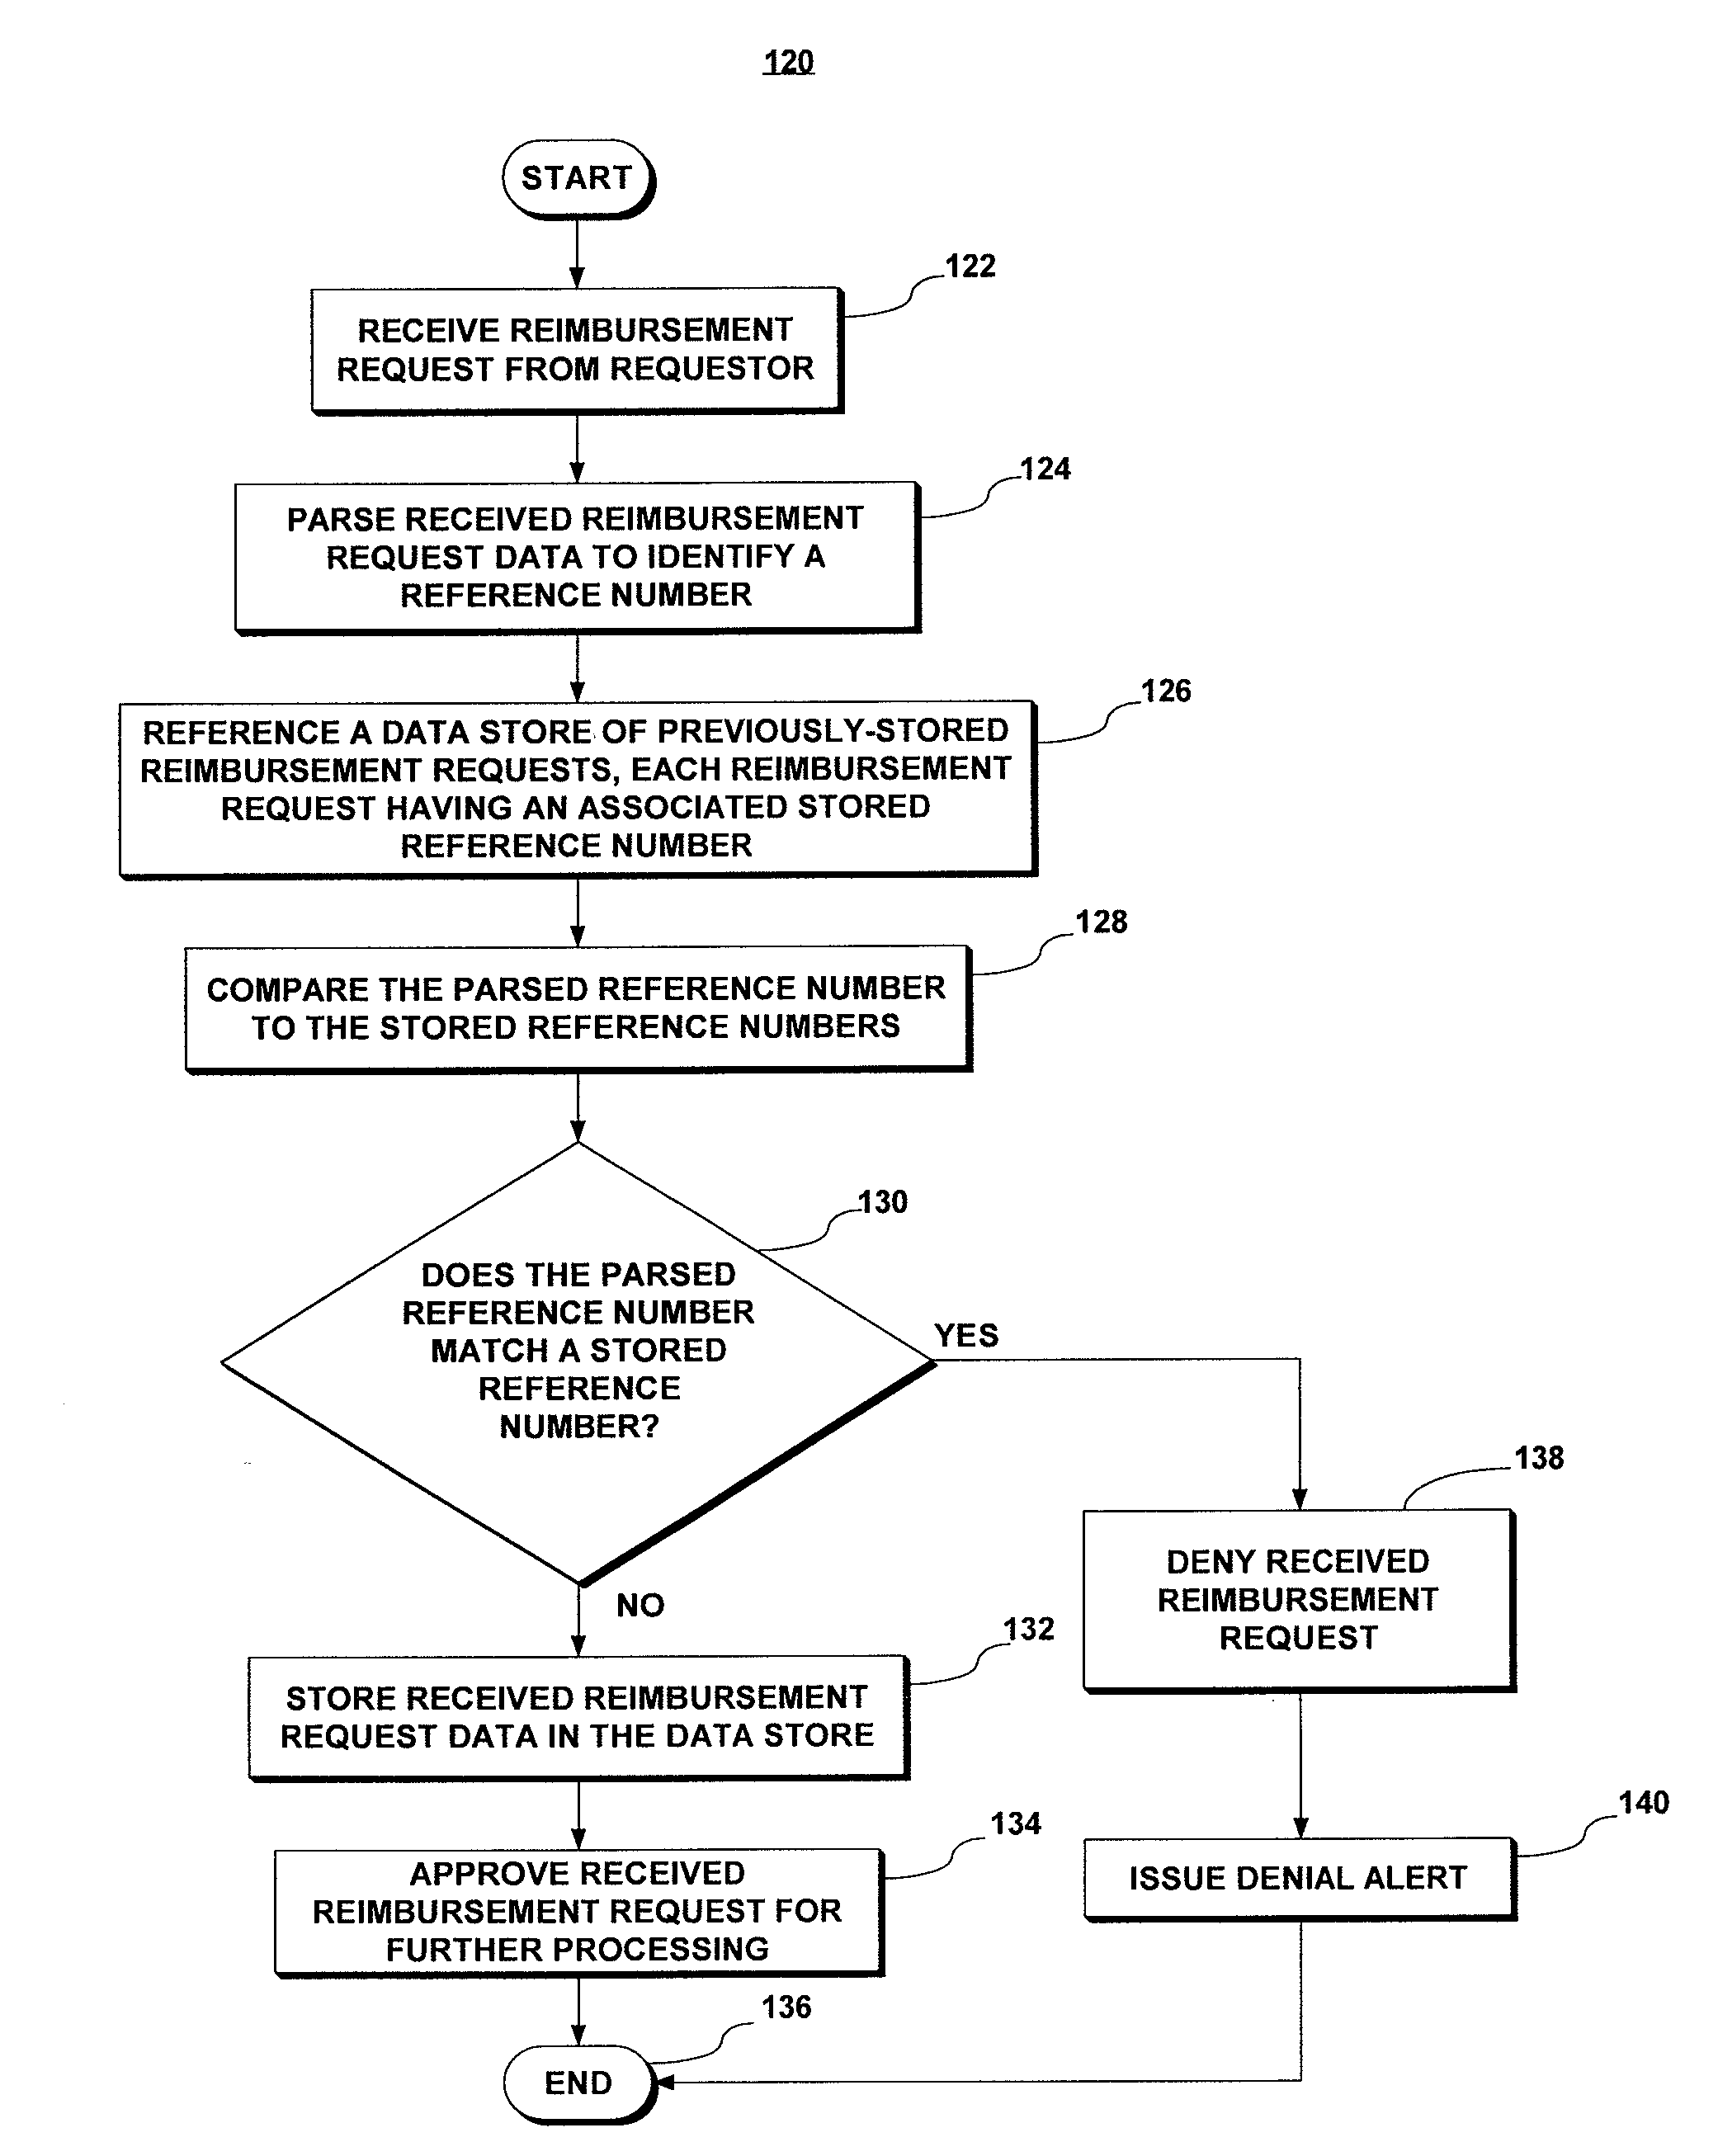 System and method for ensuring accurate reimbursement for travel expenses